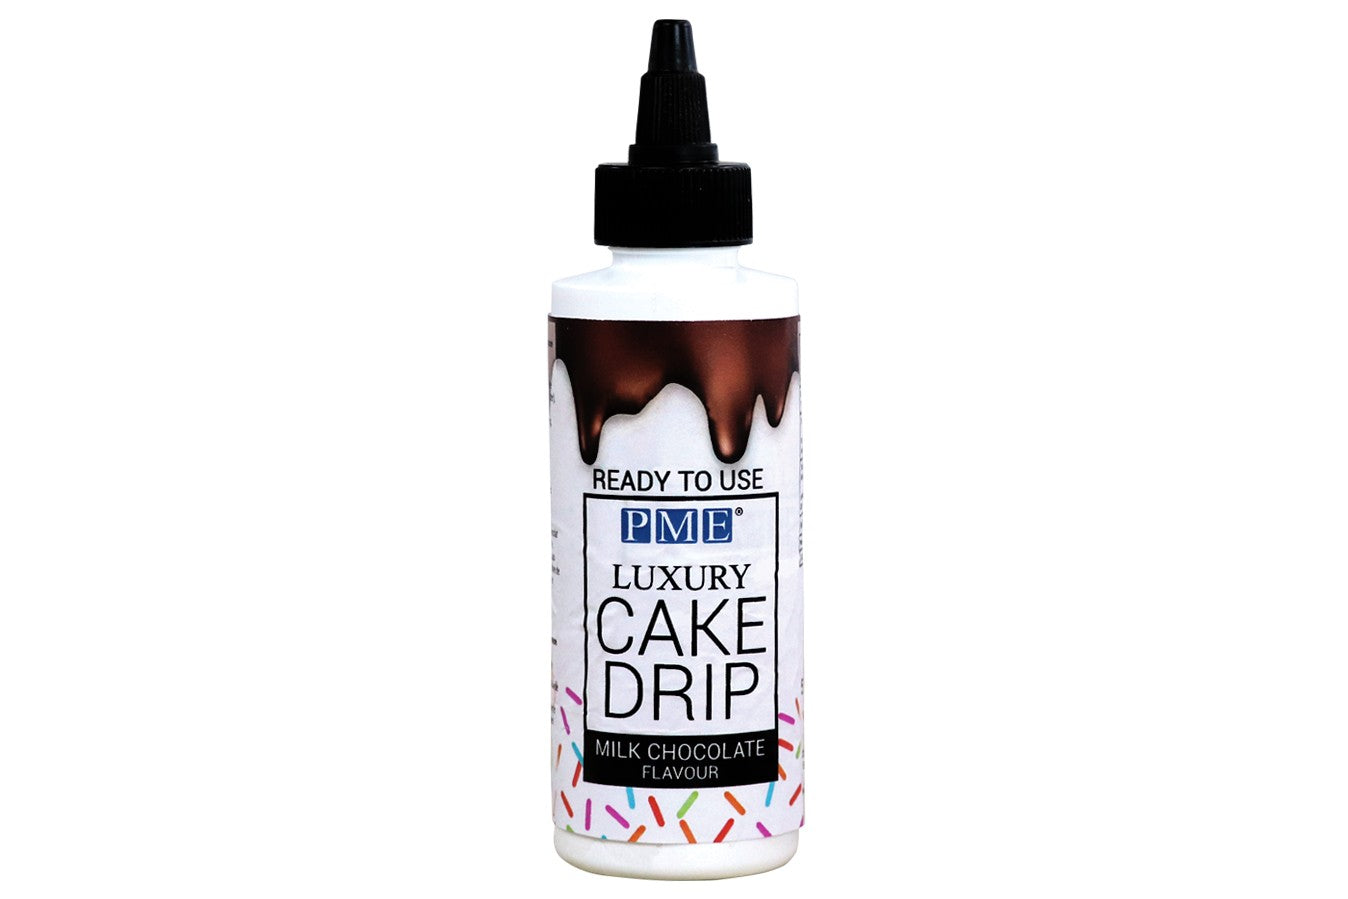 PME Luxury Milk Chocolate Cake Drip - Ready to Use Drizzle - The Cooks Cupboard Ltd